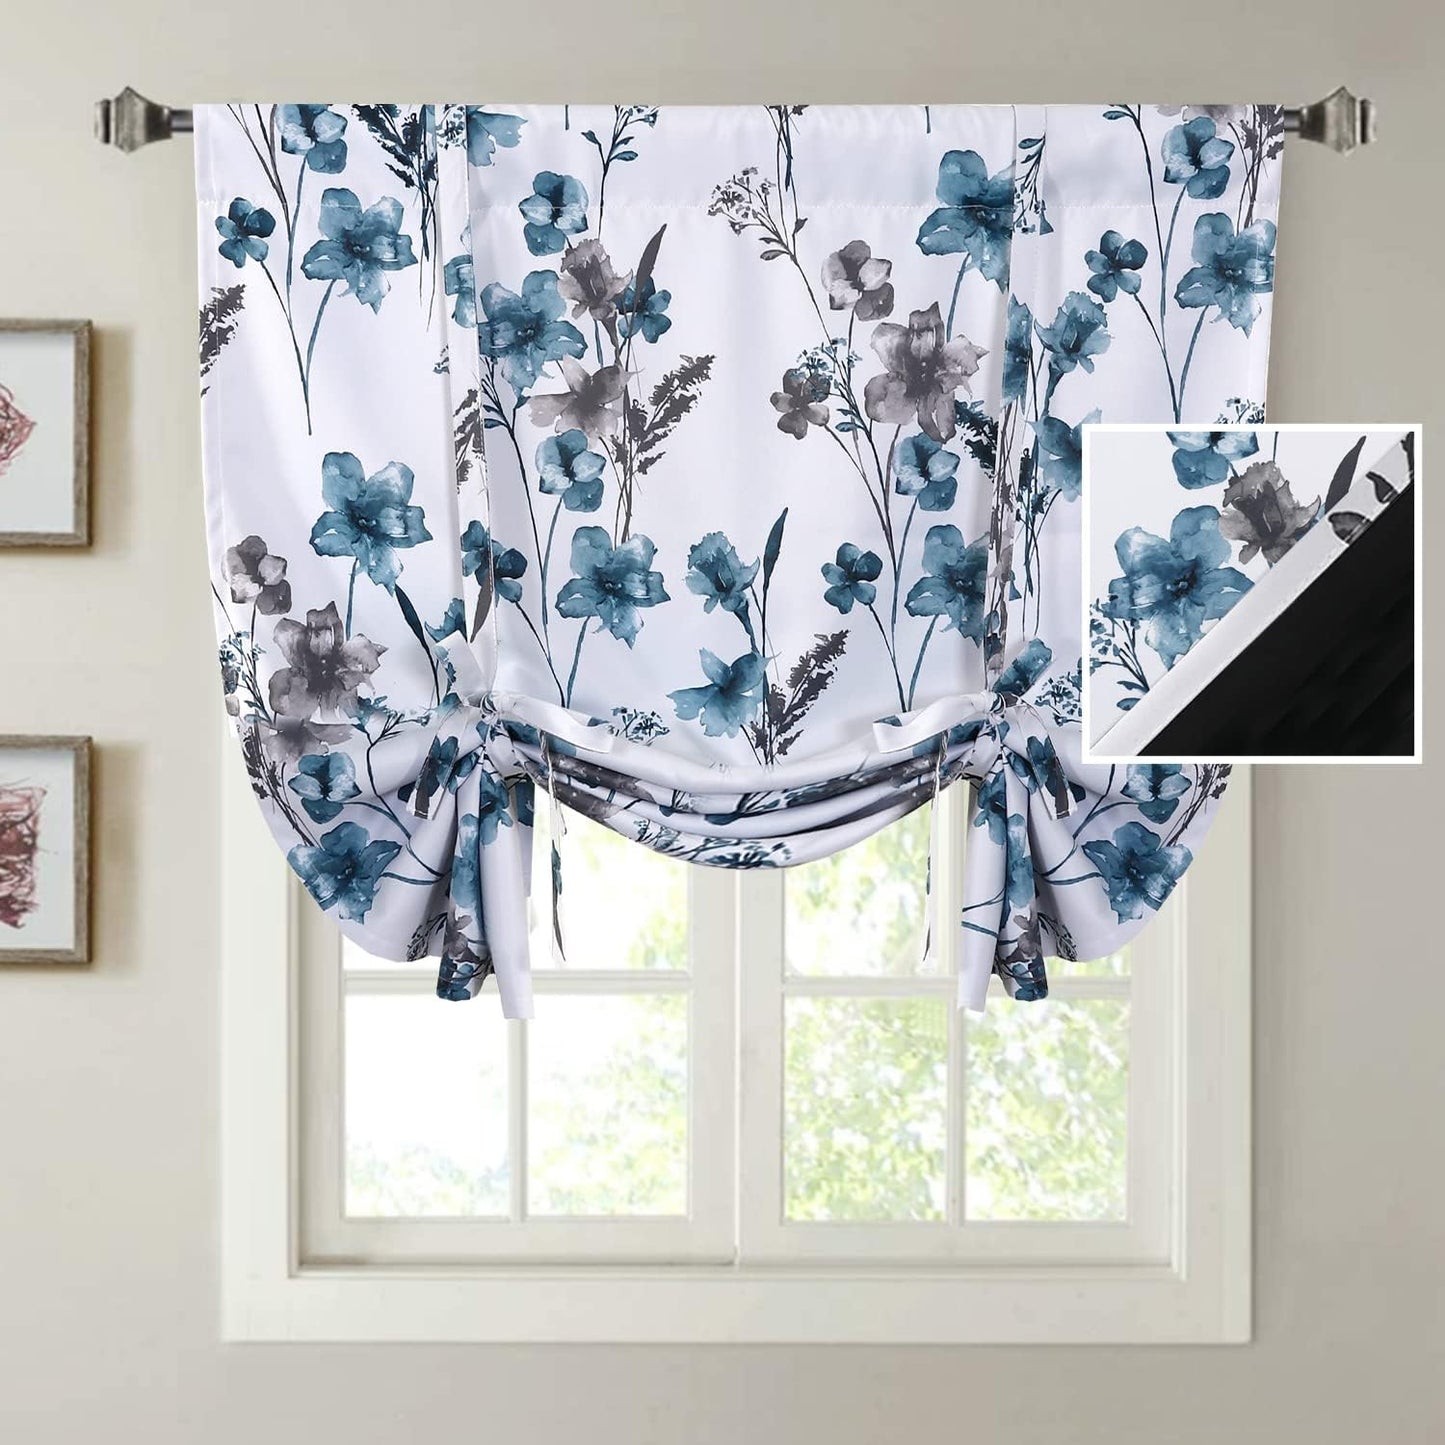 H.VERSAILTEX 100% Blackout Tie up Curtains for Bedroom Thermal Insulated Kitchen Curtains 45 Inches Long Rod Pocket Blackout Curtains for Small Window / Bathroom with Black Liner, White 42"W X 45"L  H.VERSAILTEX Cattleya In Grey/Blue 42"W X 45"L 